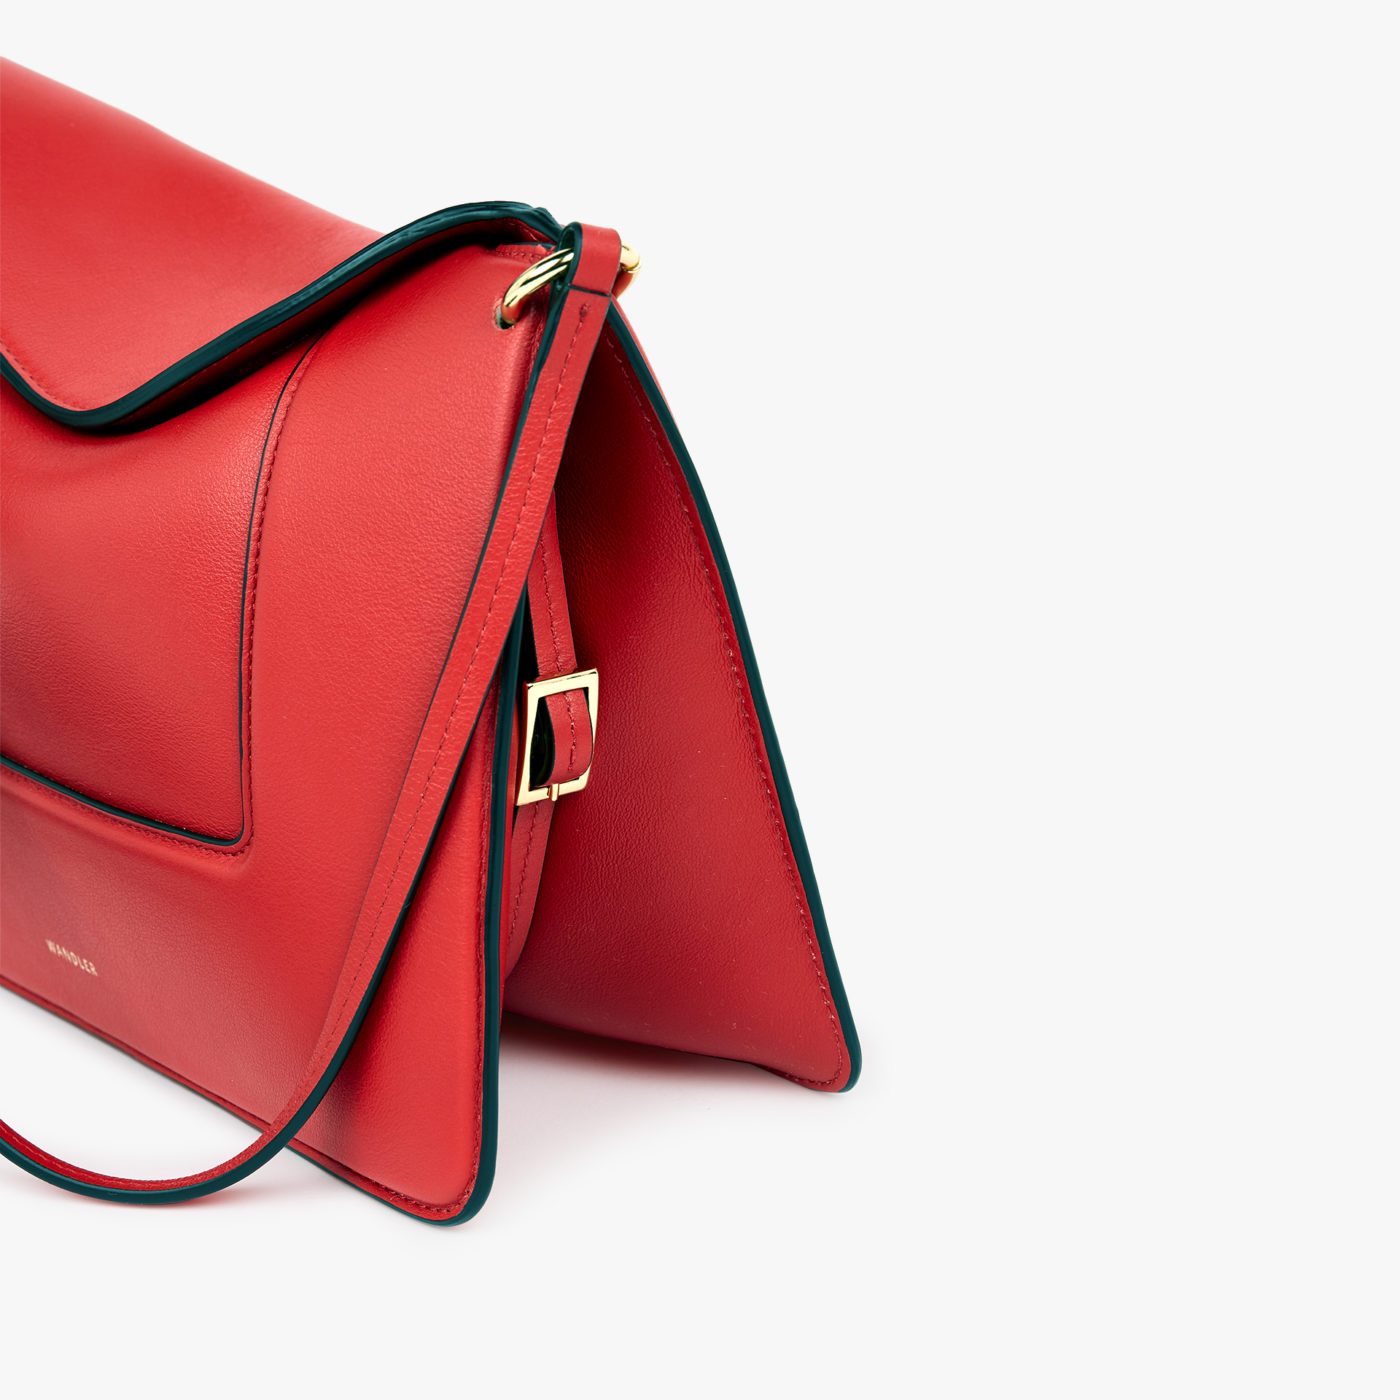 A packshot fashion image showcasing a red handbag with dynamic angle, professionally captured by I Heart Studios.